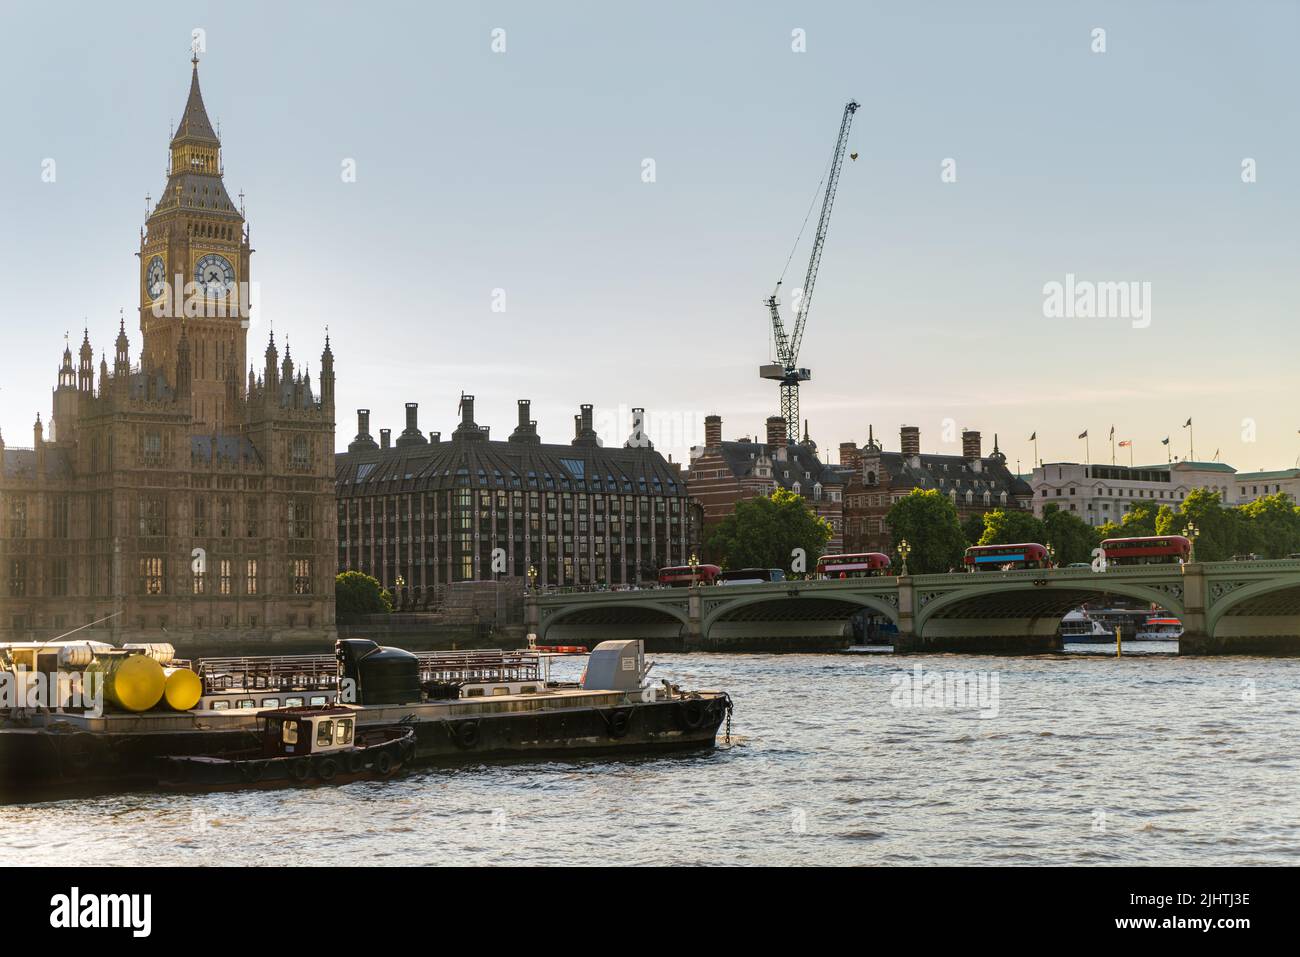 The Houses of Parliament, Big Ben and Red Buses on Westminster Bridge over The River Thames at dusk in London, England Stock Photo